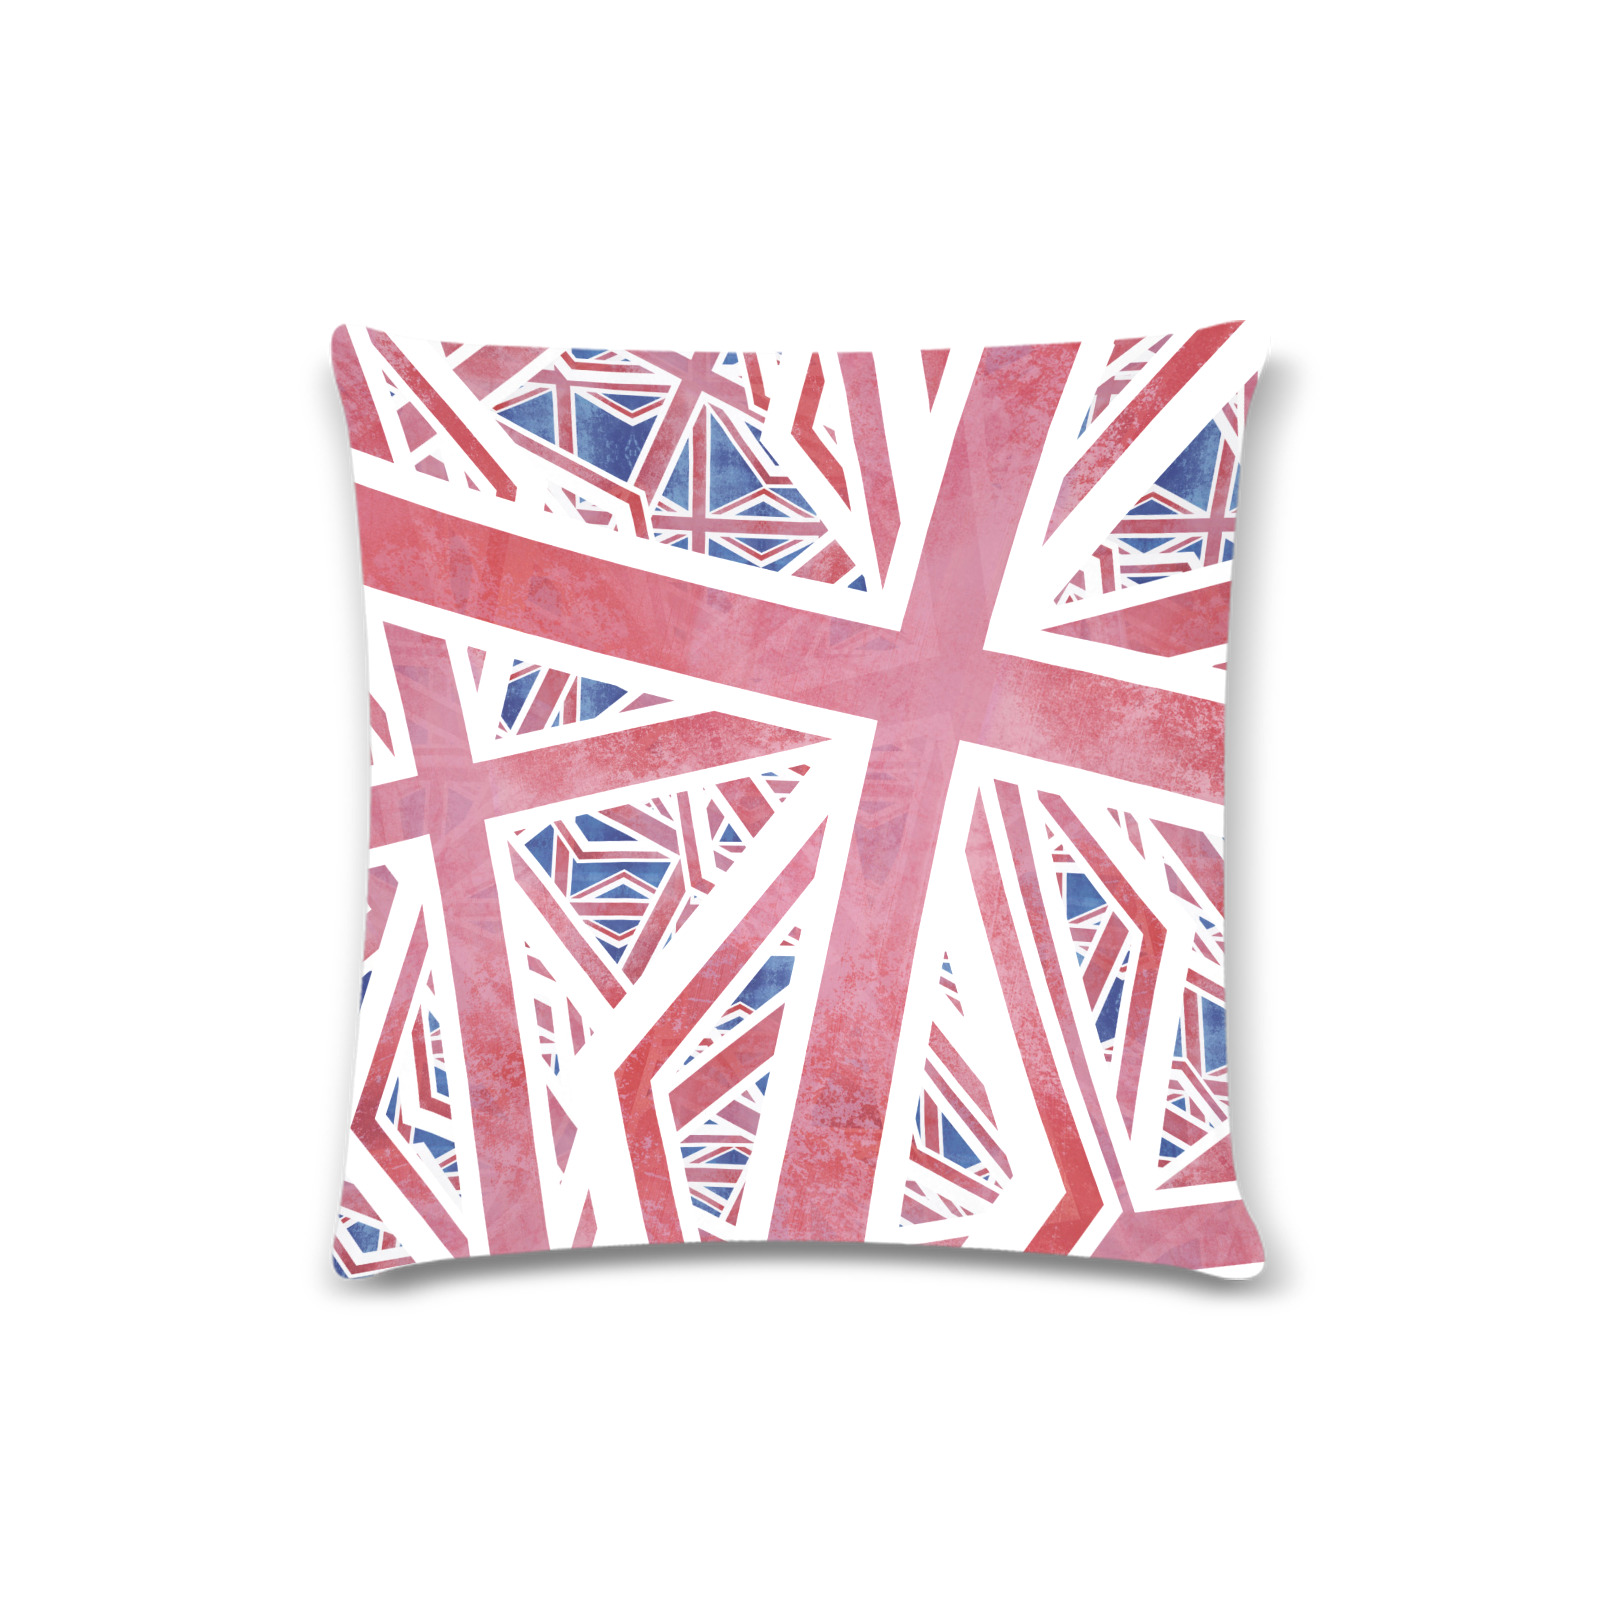 Abstract Union Jack British Flag Collage Custom Zippered Pillow Case 16"x16" (one side)